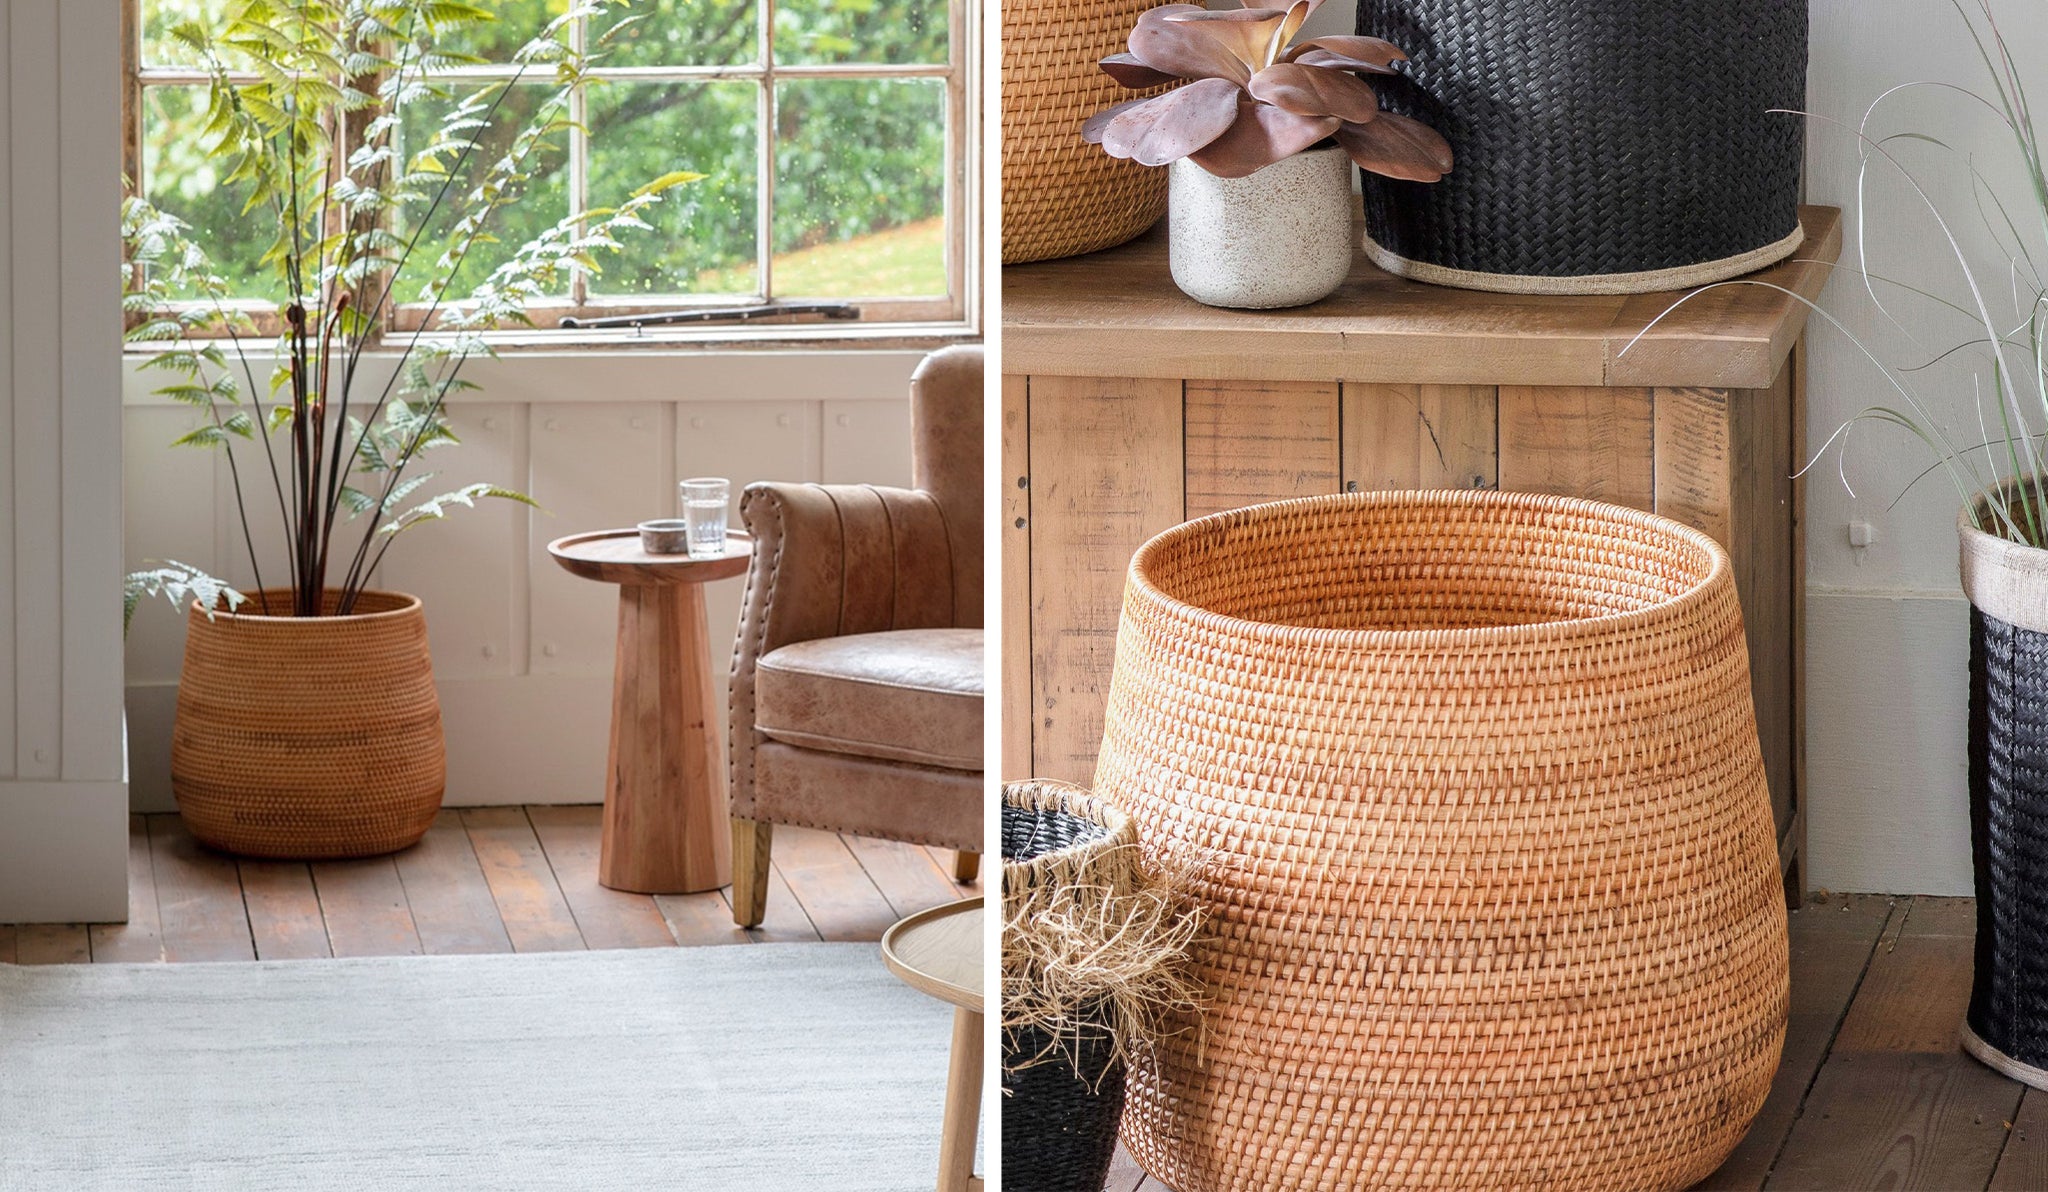 Made from natural material, these Shengo baskets will make your space feel laid-back and relaxed. They're perfect for creating more storage options, and make beautiful plant pots.